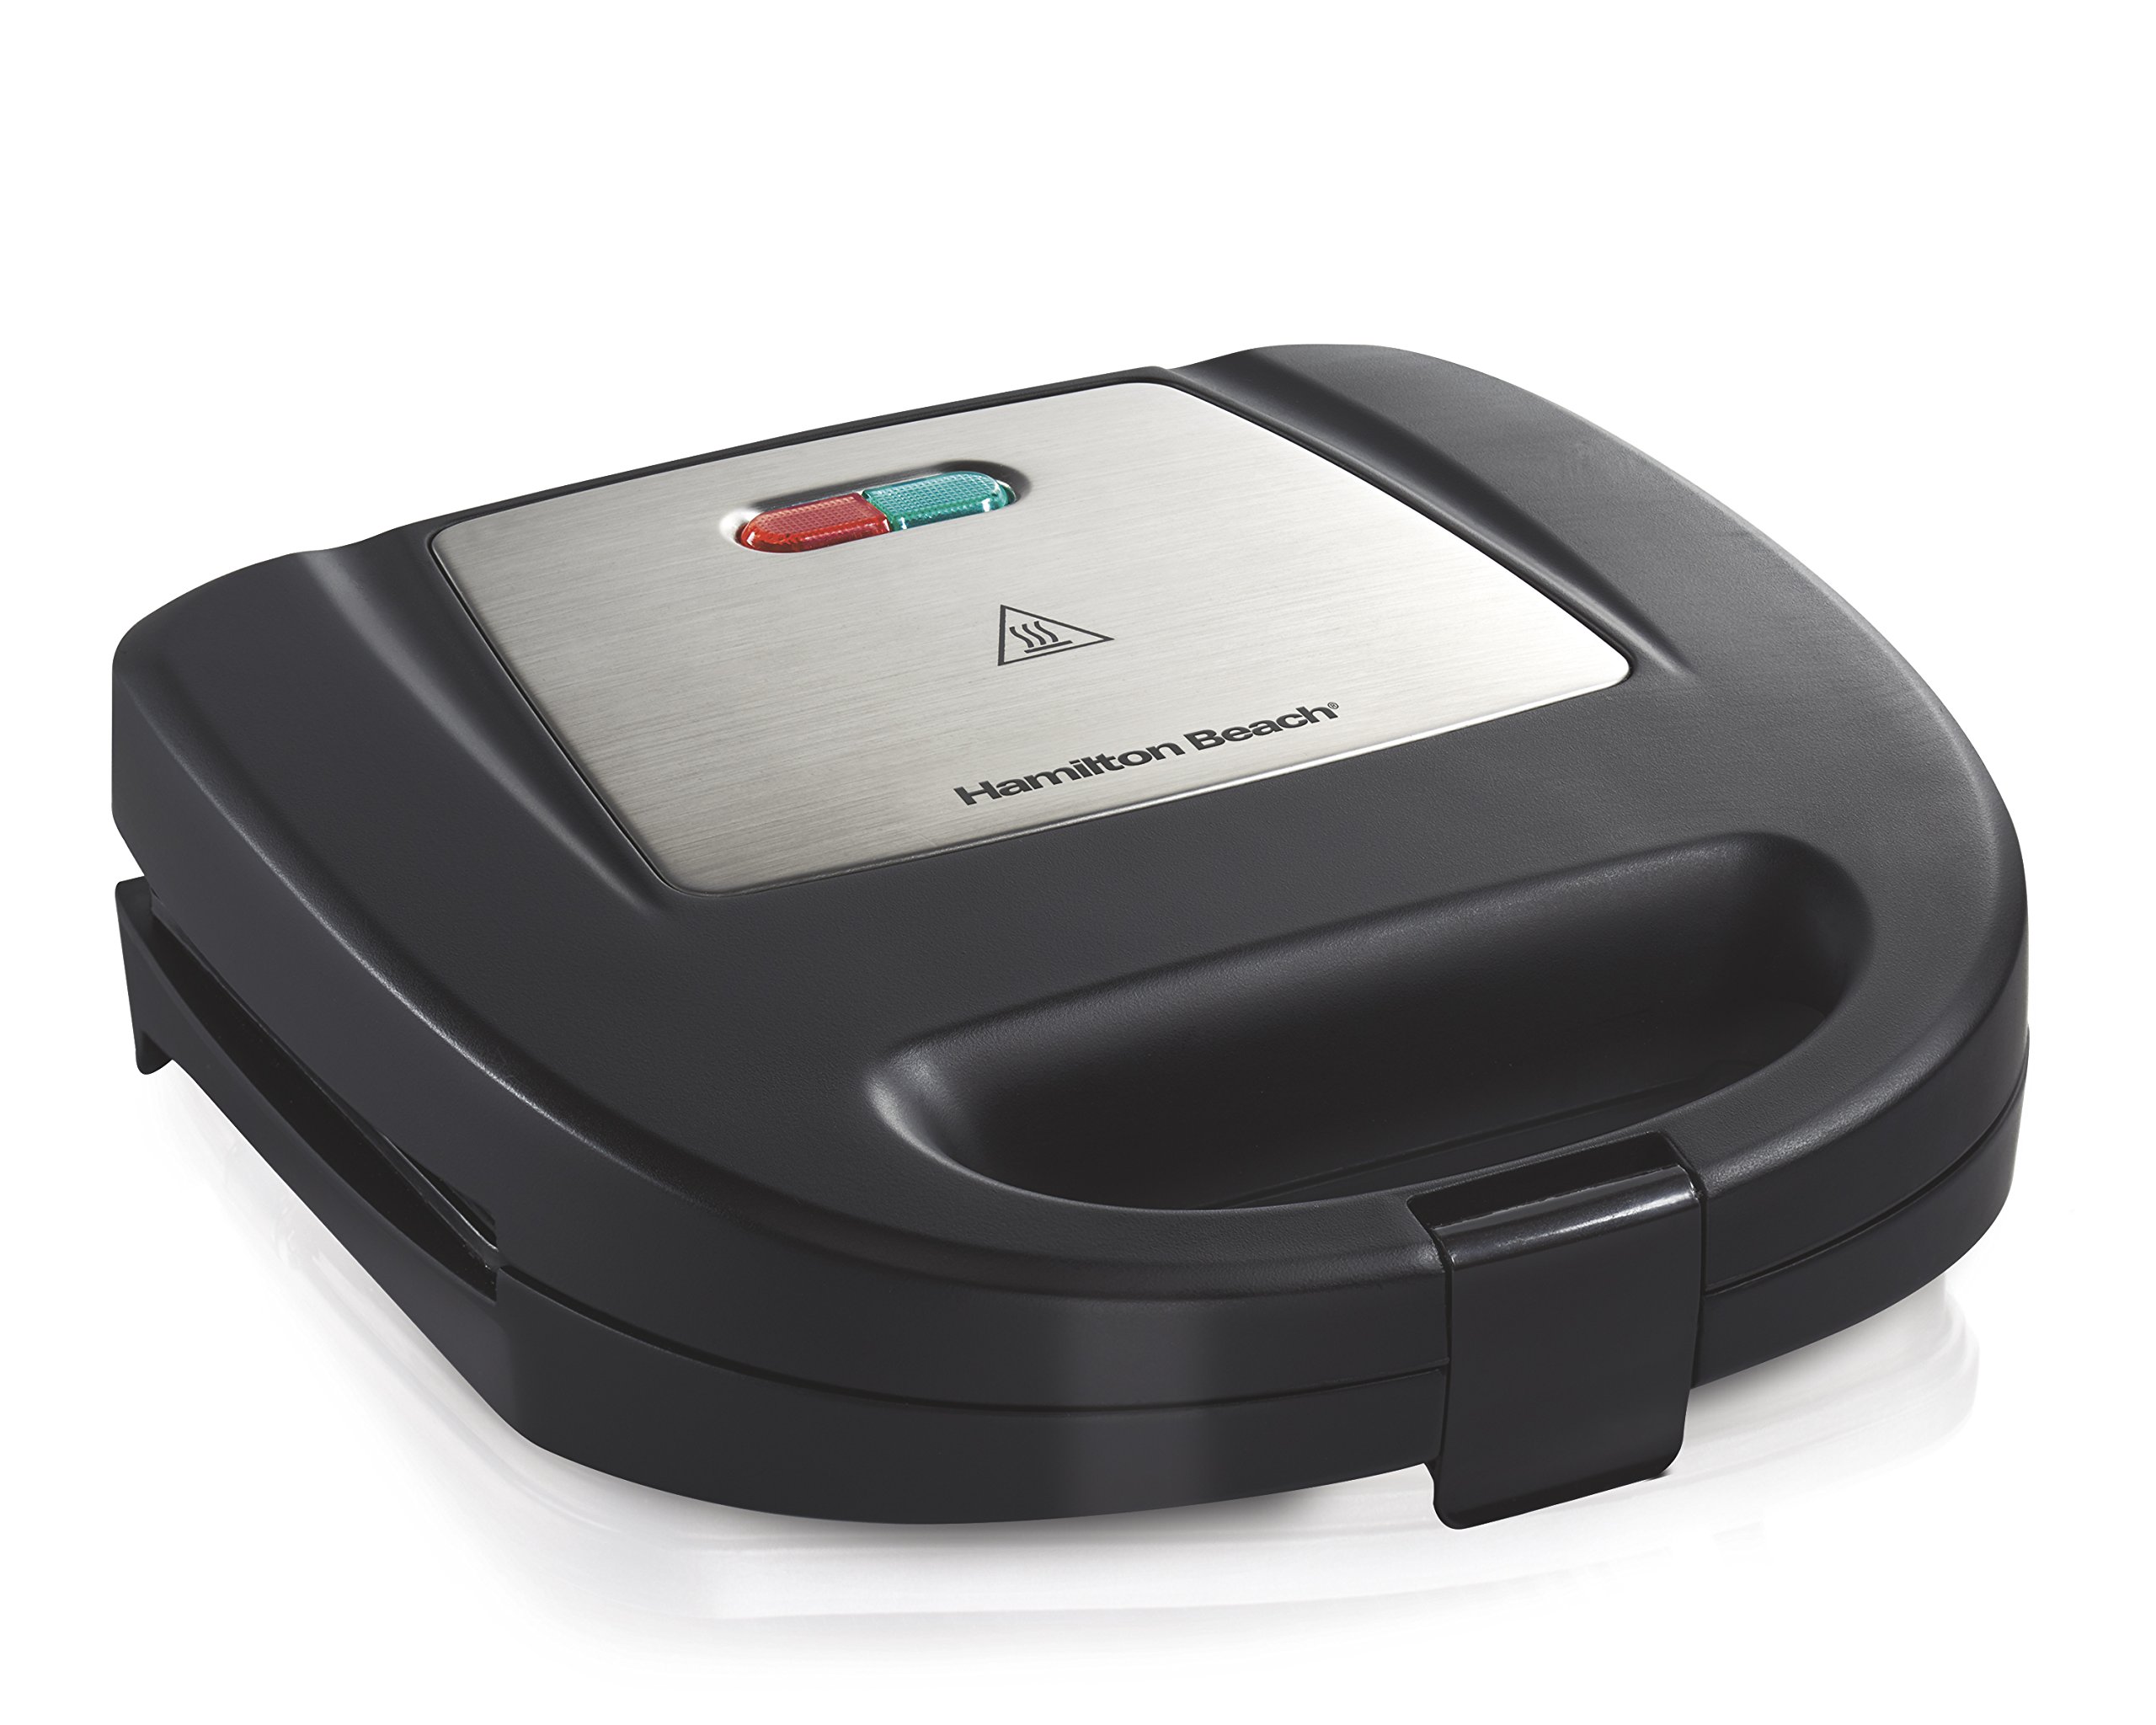 Hamilton Beach Electric Sealed Sandwich Maker Grill with Nonstick Plates, Makes Stuffed French Toast, Omelets, Compact & Easy to Store, Black (25430)